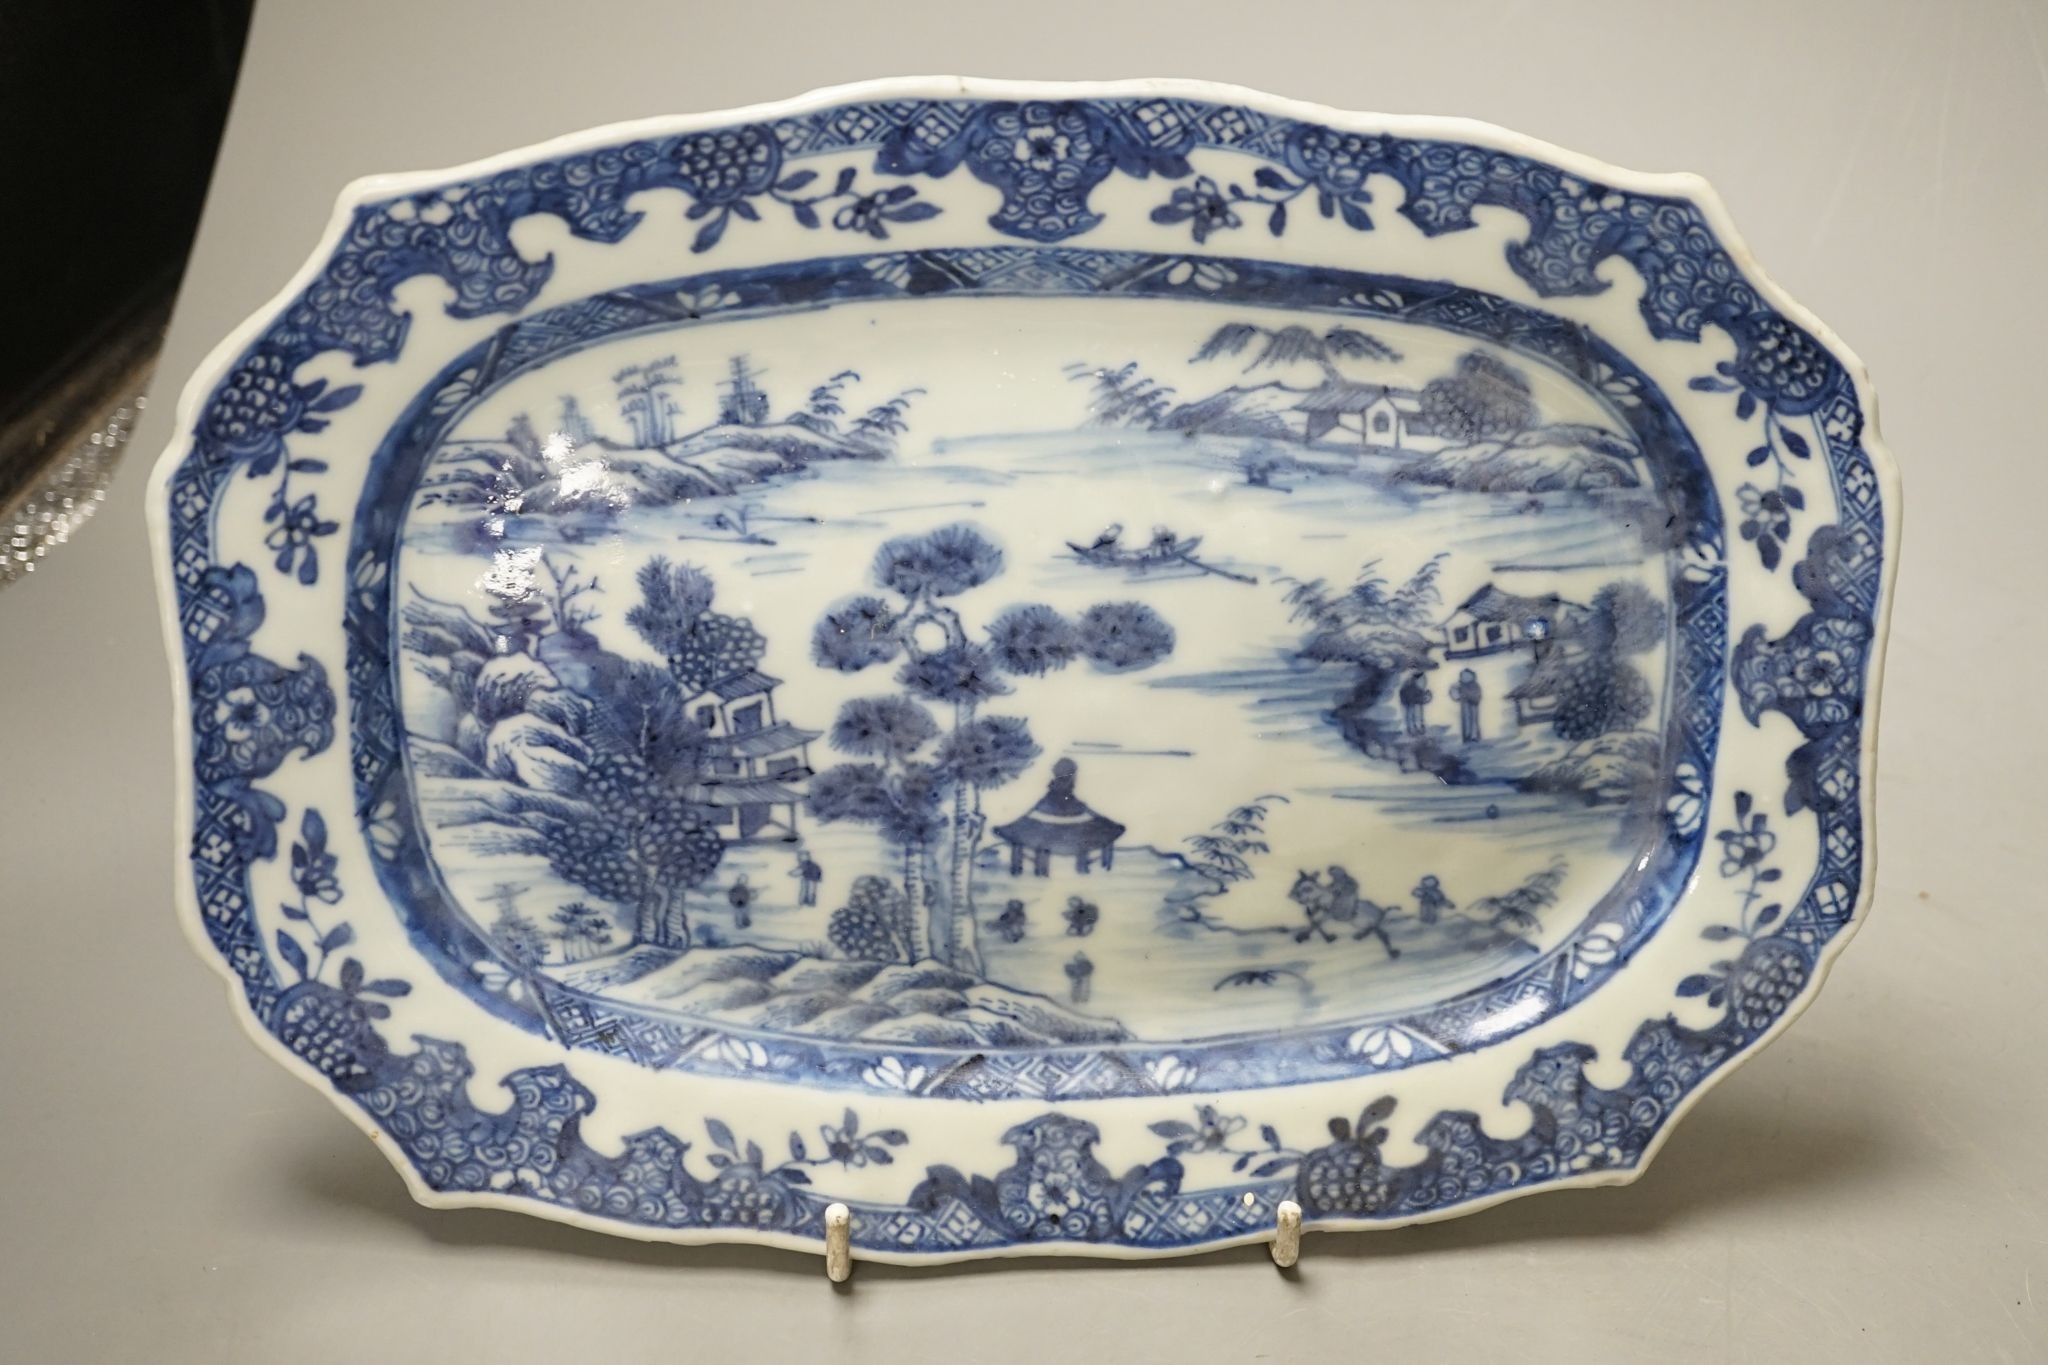 A pair of 18th century Chinese export Blue and white dishes, 27cm